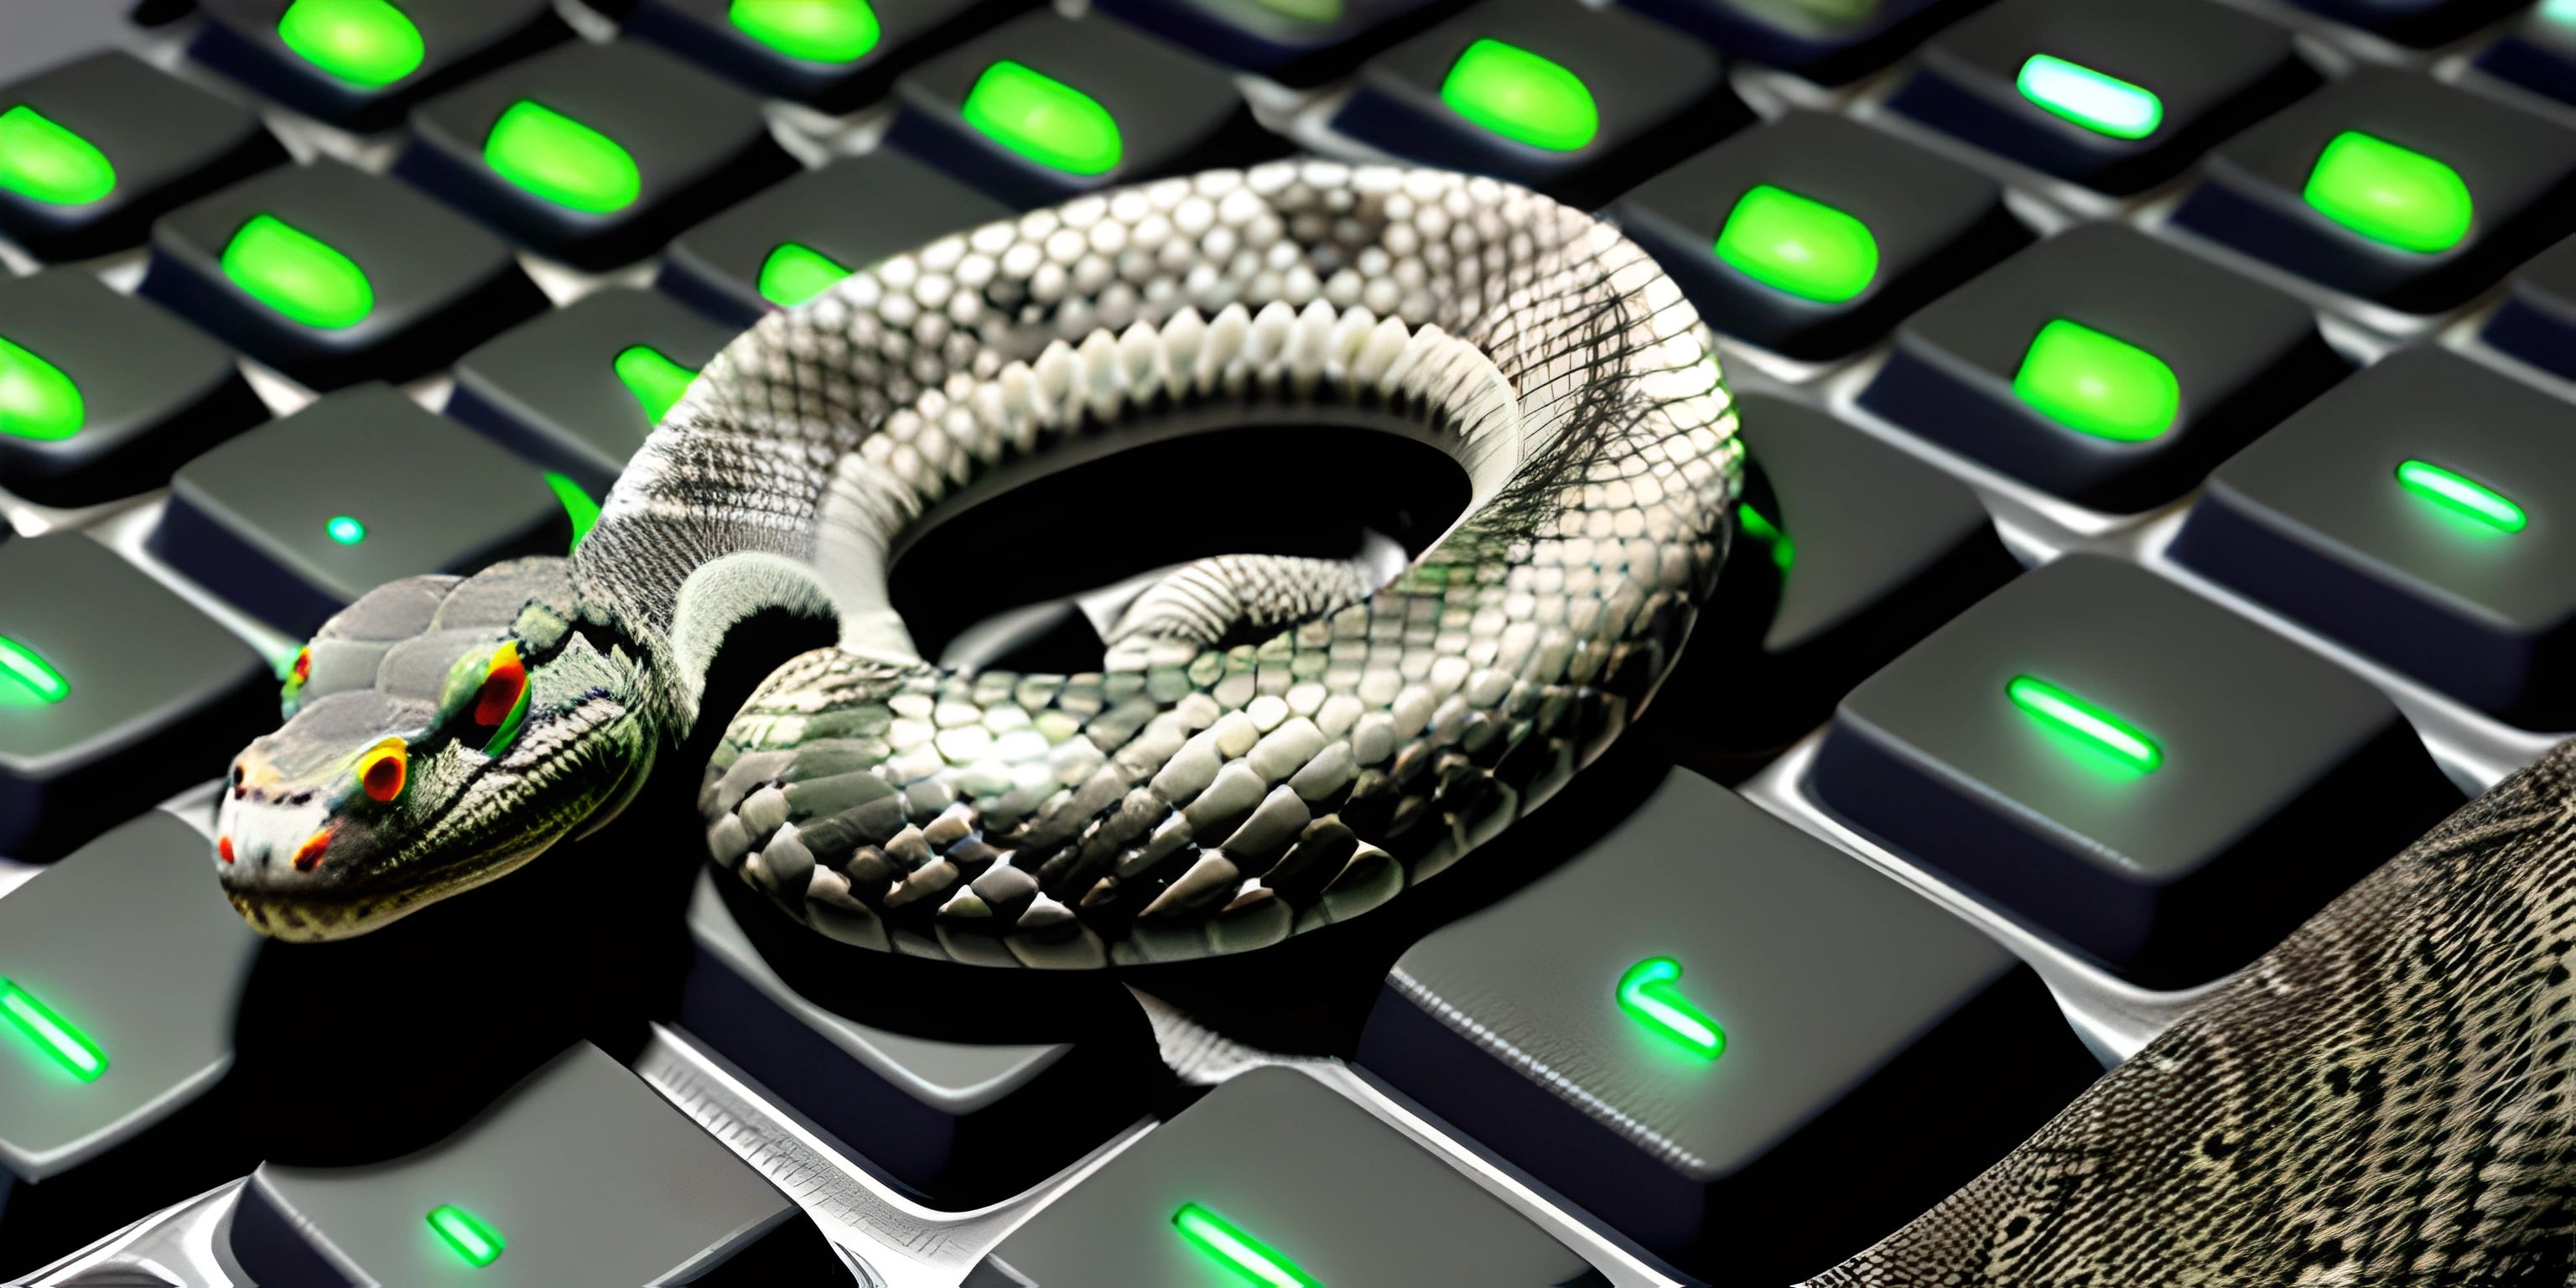 a snake wrapped around to the back of a keyboard for snakes only get comfortable to play on